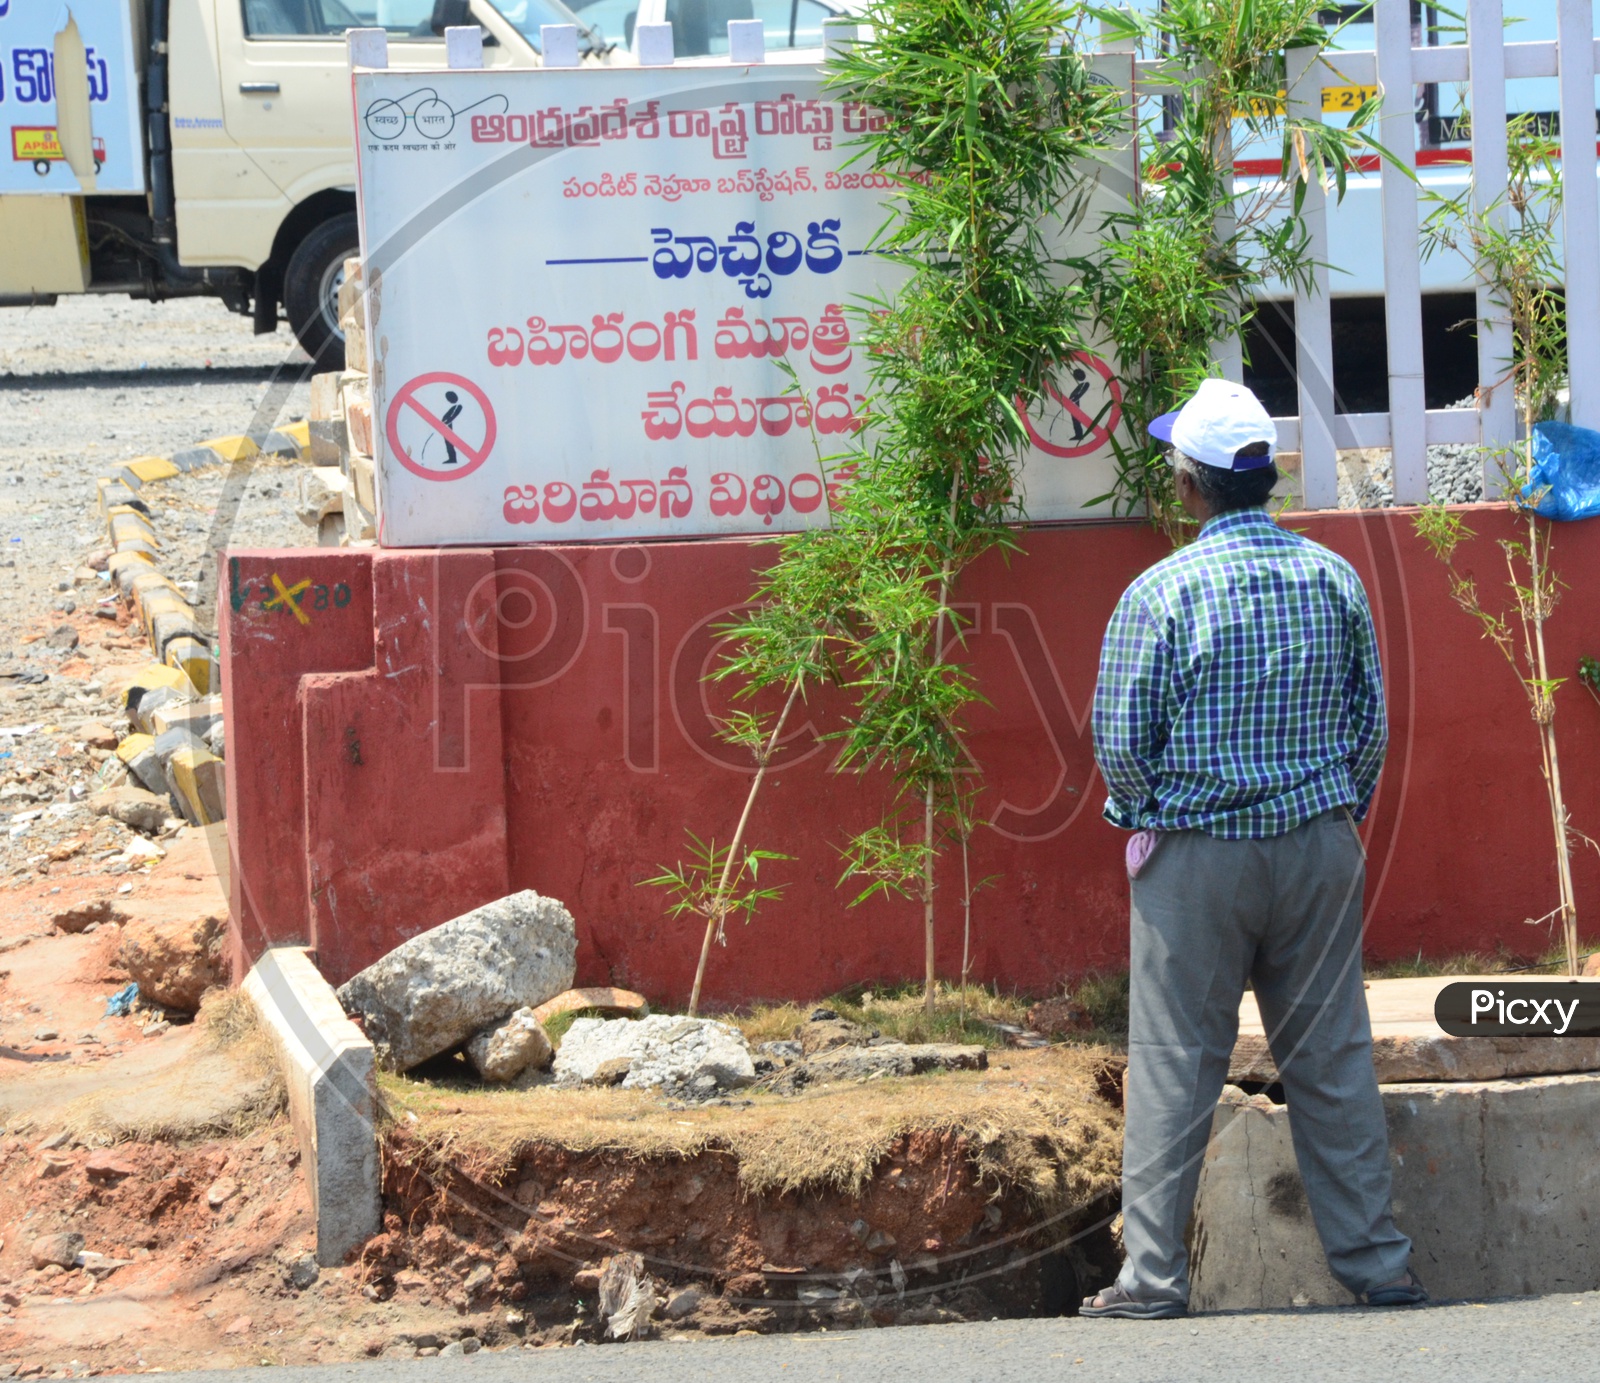 Indian Man Urinating in front of the "No Public Urinating Info Board"